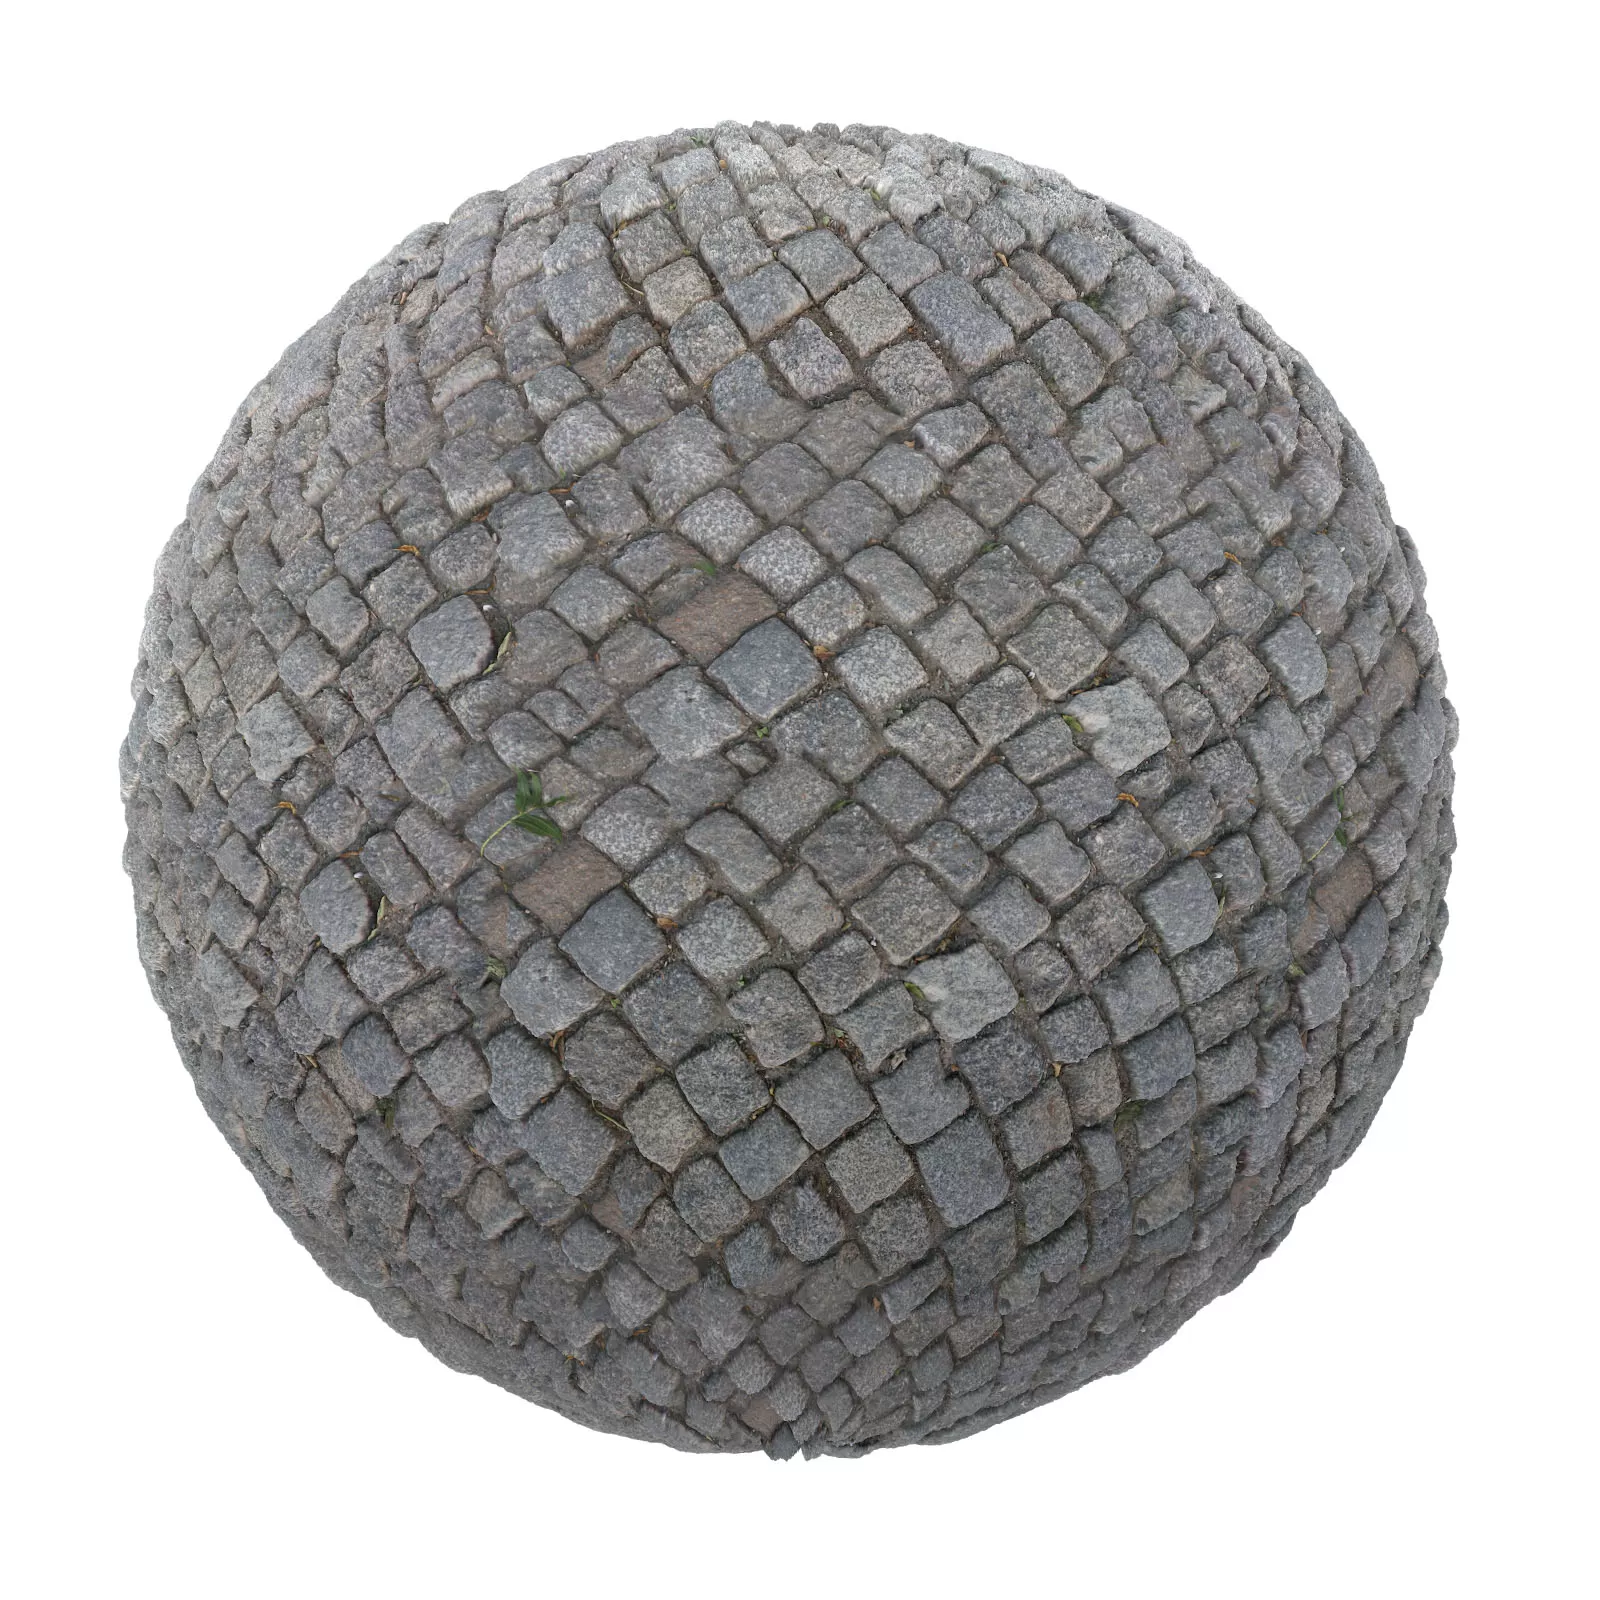 PBR CGAXIS TEXTURES – PAVEMENTS – Stone Pavement 2